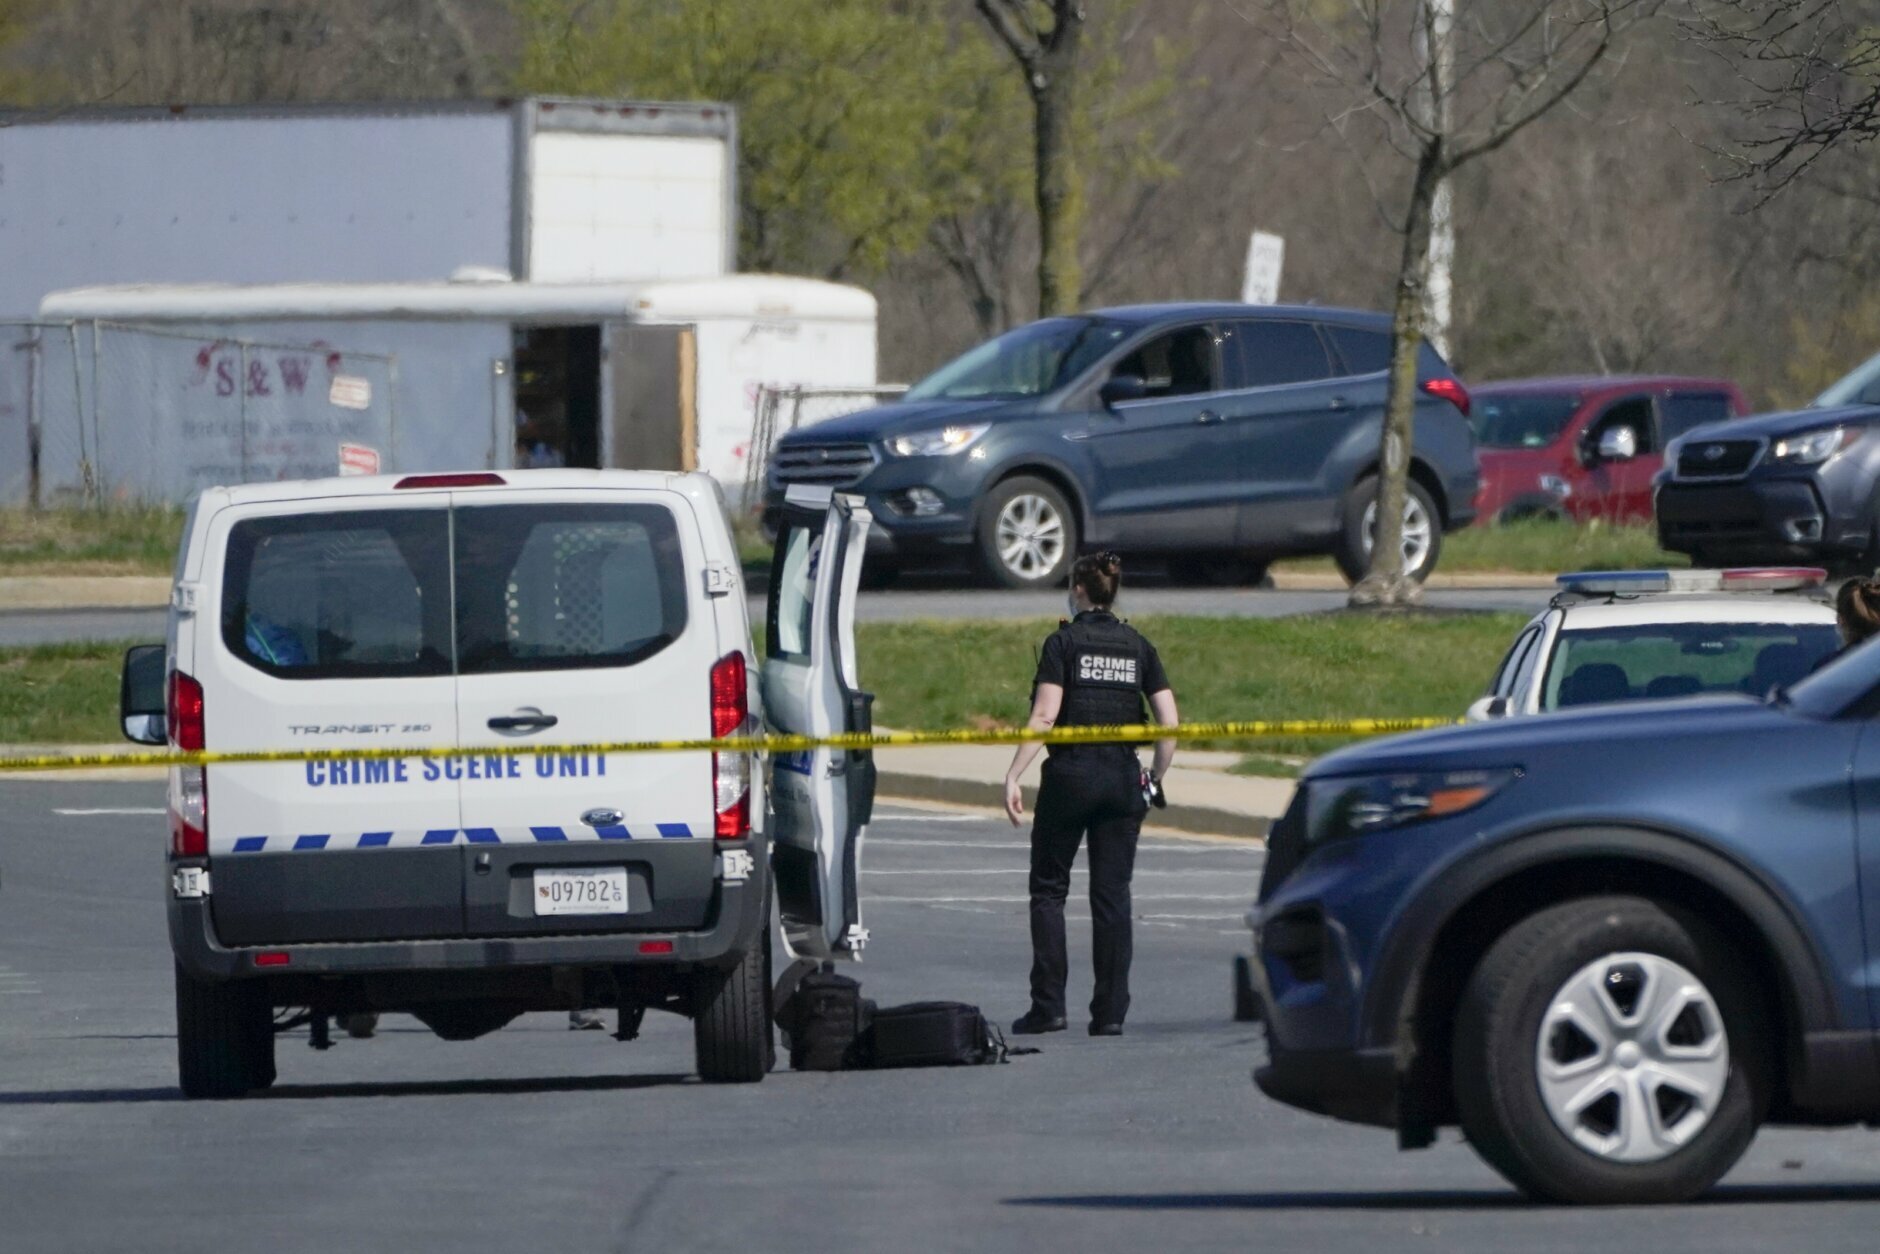 A crime scene technician stands near the scene of a shooting at a business park in Frederick, Md., Tuesday, April 6, 2021. (AP Photo/Julio Cortez)